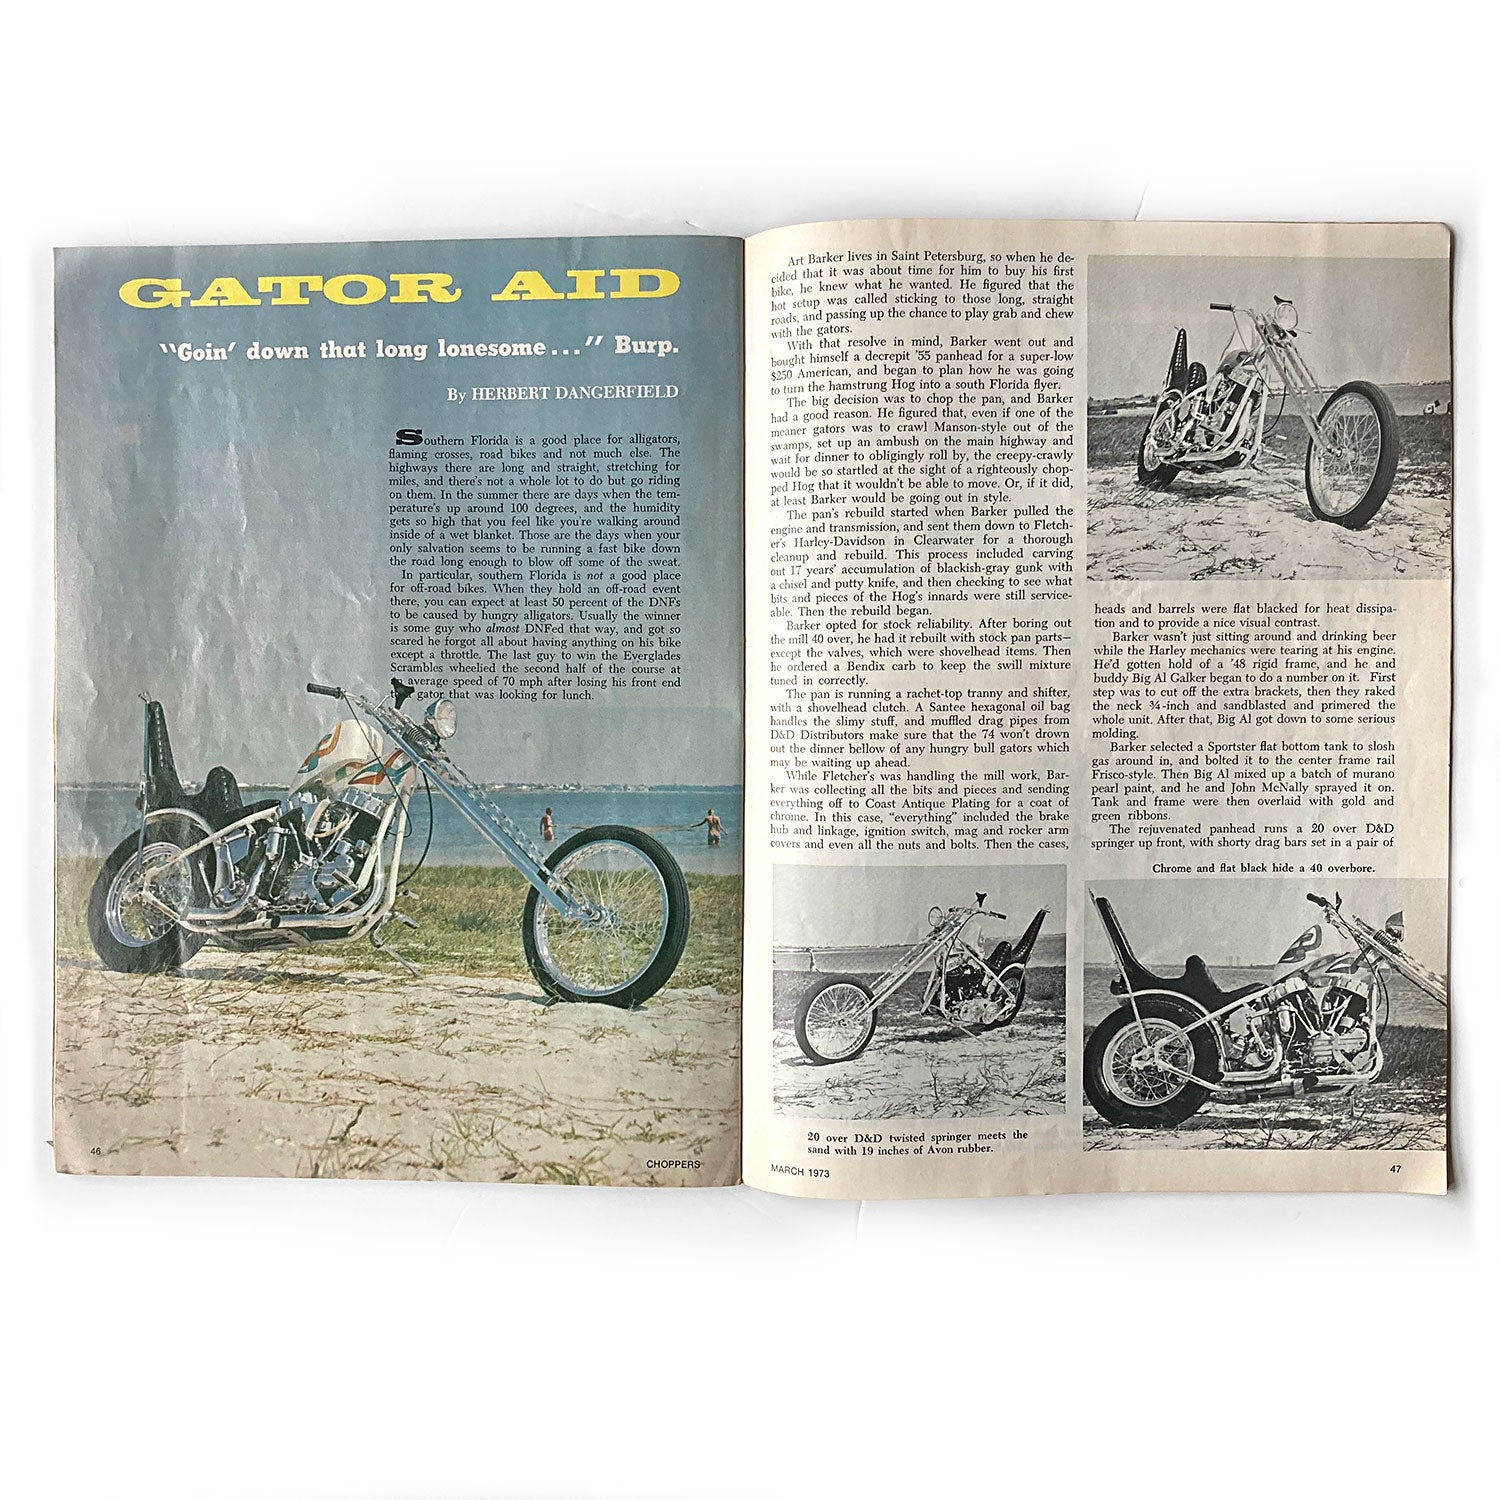 Choppers magazine, March 1973